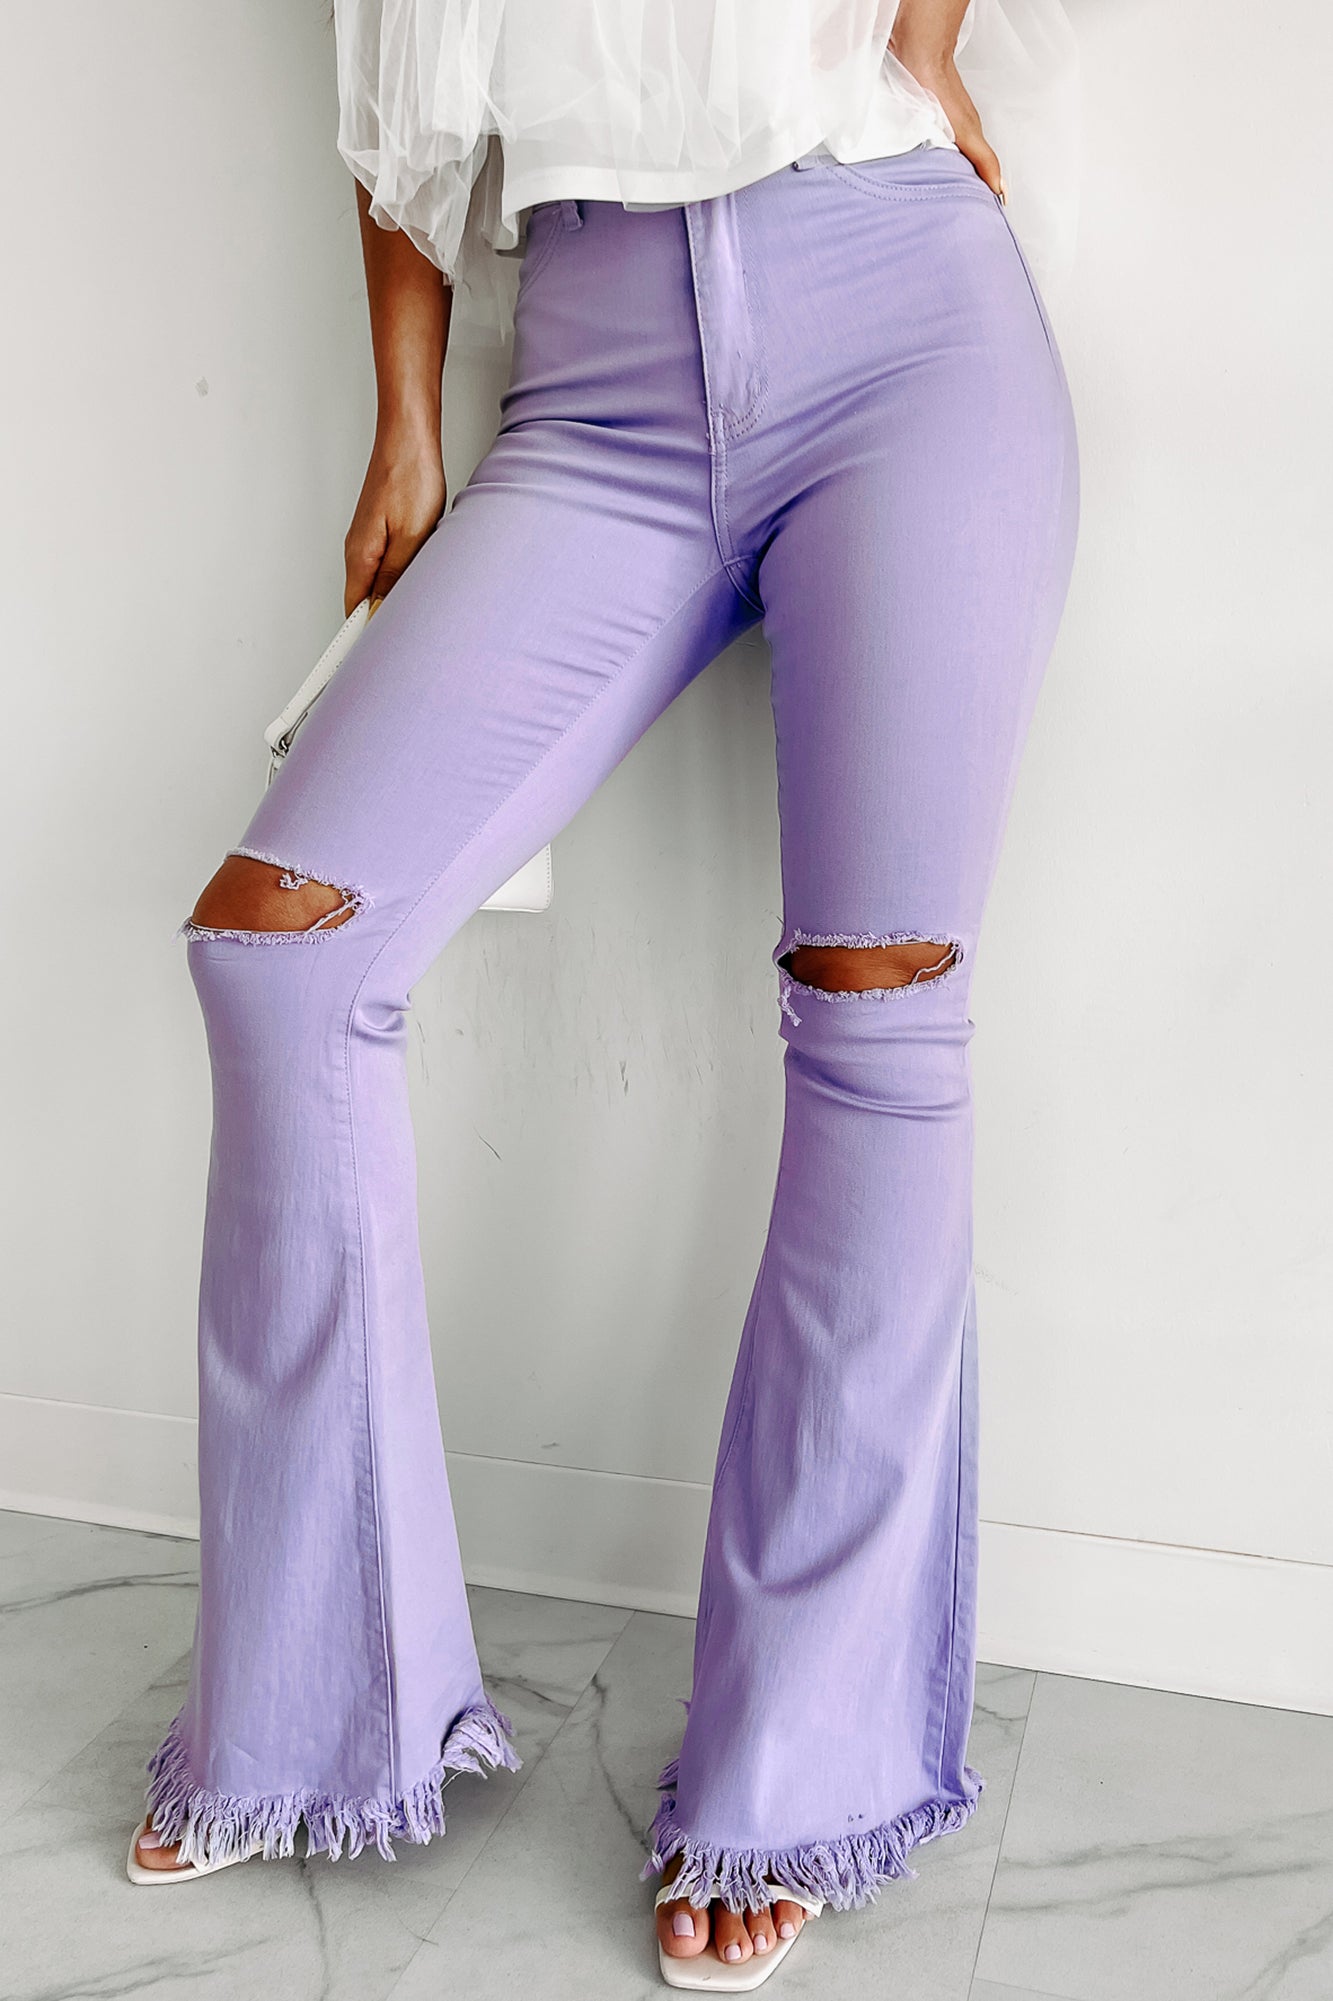 Doorbuster Bold Moves High Rise Distressed Flare Jeans (Lavender) - NanaMacs